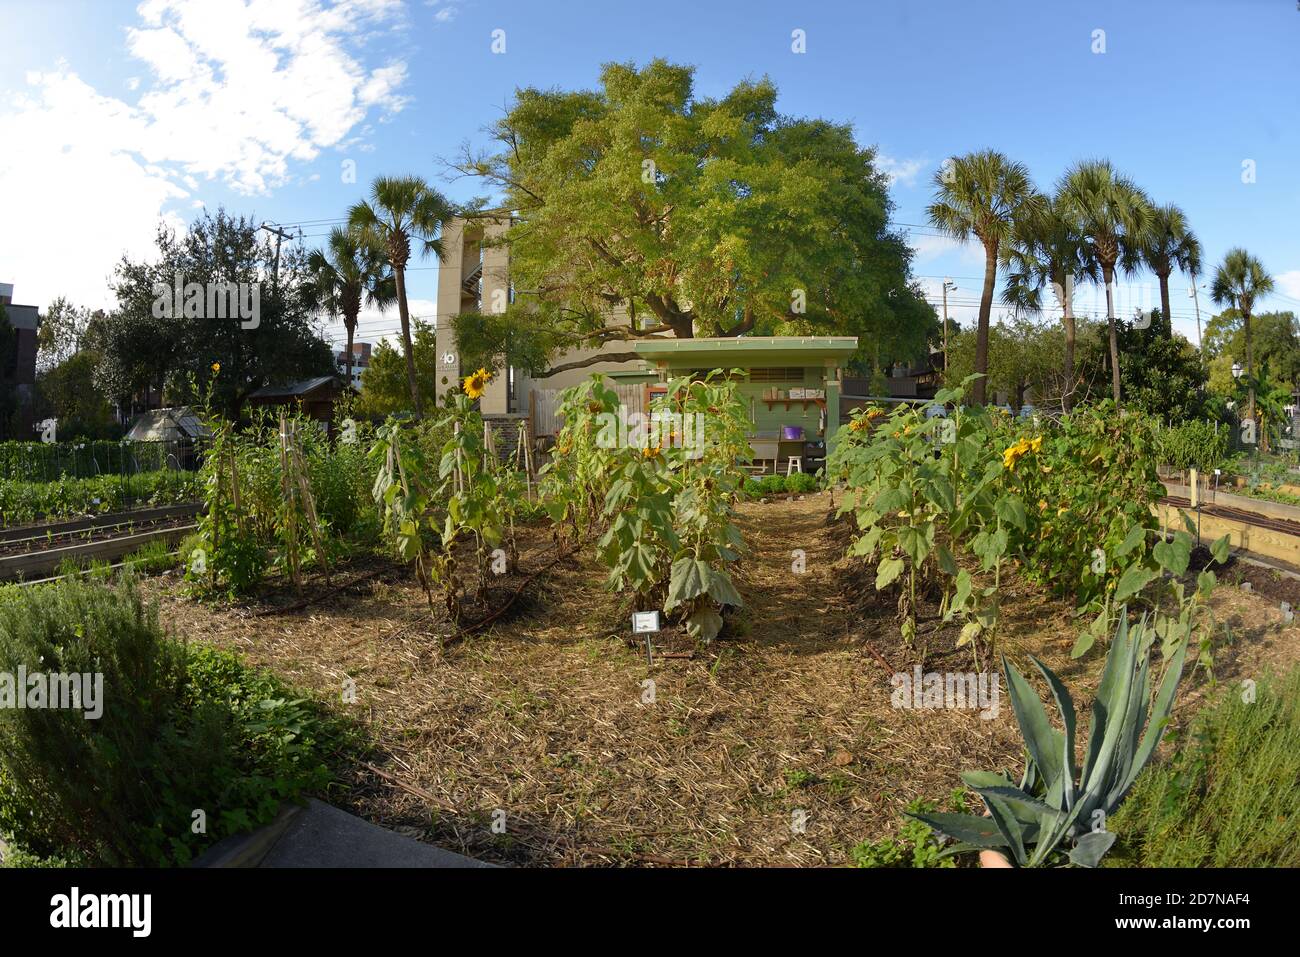 Urban Gardens Maintained by Volunteer Farmers with Mini Library, Corn, Peppers, Avocados, and other Vegetables, Eye in Tree, Pumpkins, Bee, Hive, Pun. Stock Photo